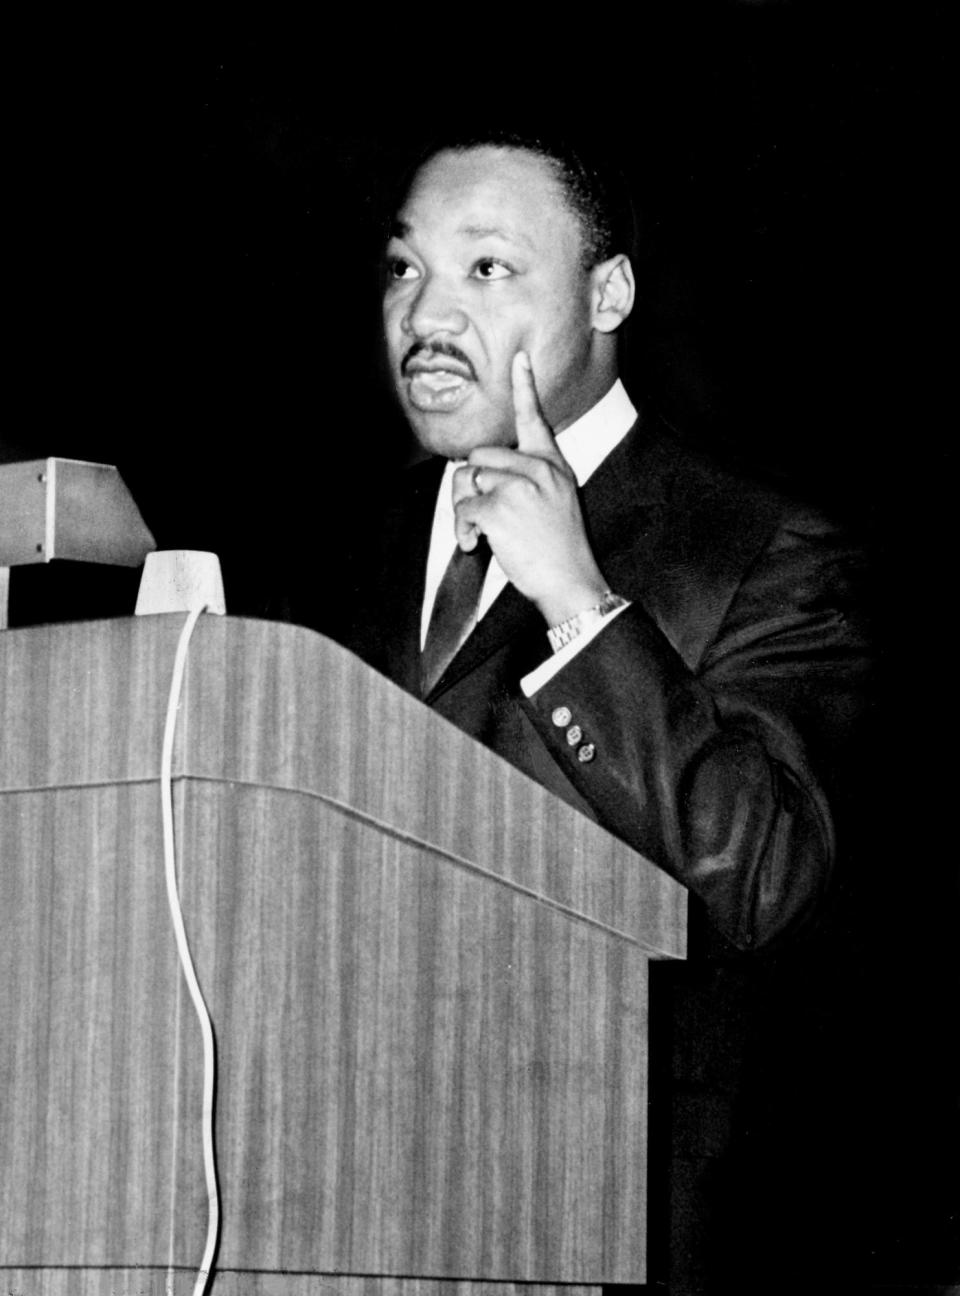 The Rev. Martin Luther King Jr., said in Nashville on Dec. 28, 1962, that the price America will pay if it refuses to deal with the problems of racial discrimination is "destruction of our democracy." King delivered the keynote address, which officially open a three-day conference on racial problems.